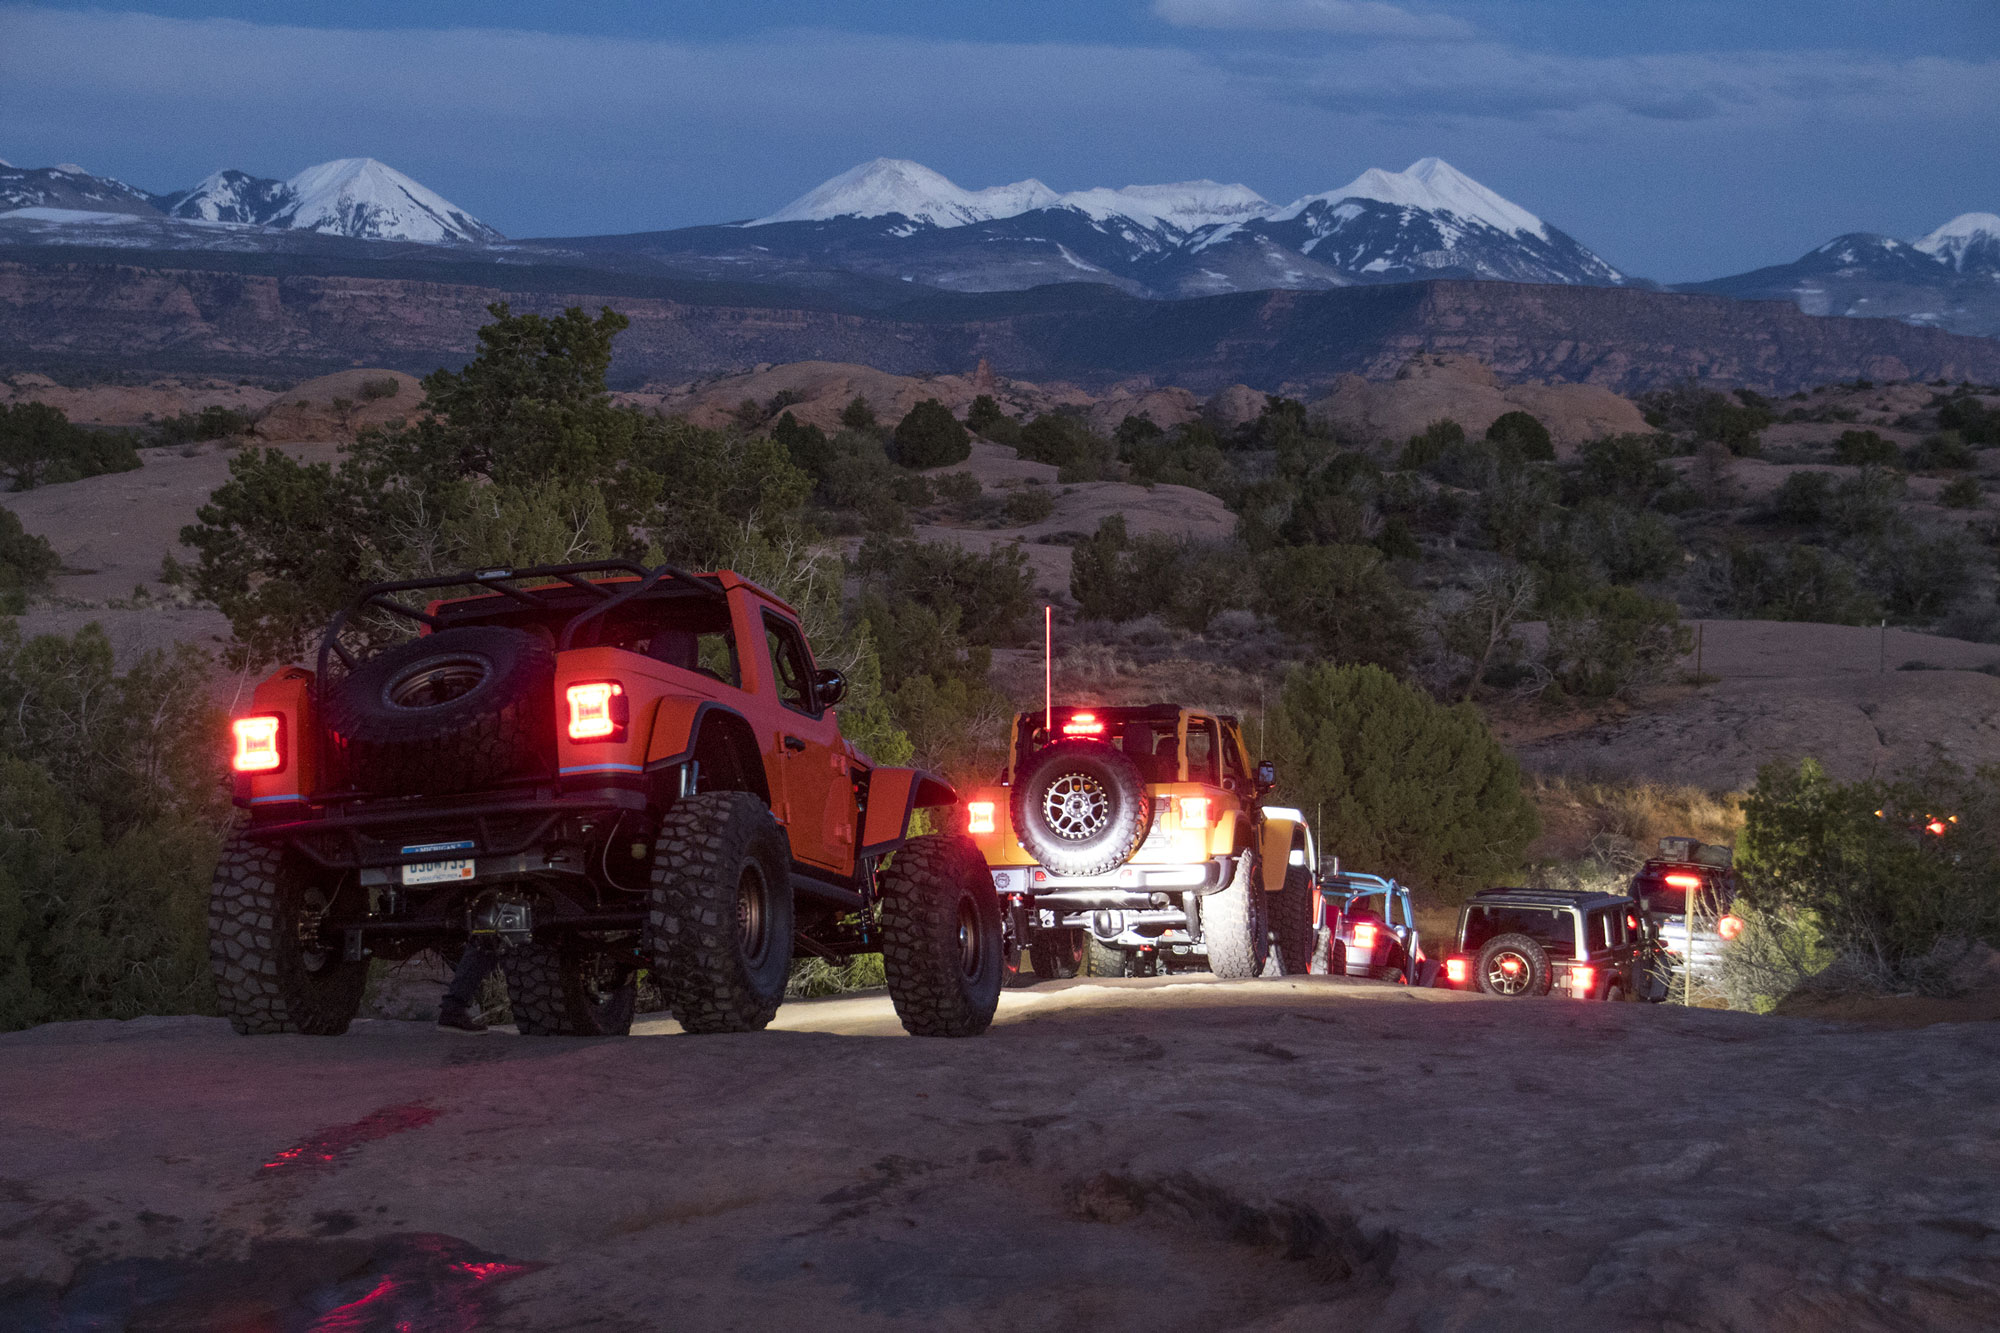 Several Jeeps traverse off-road near Moab